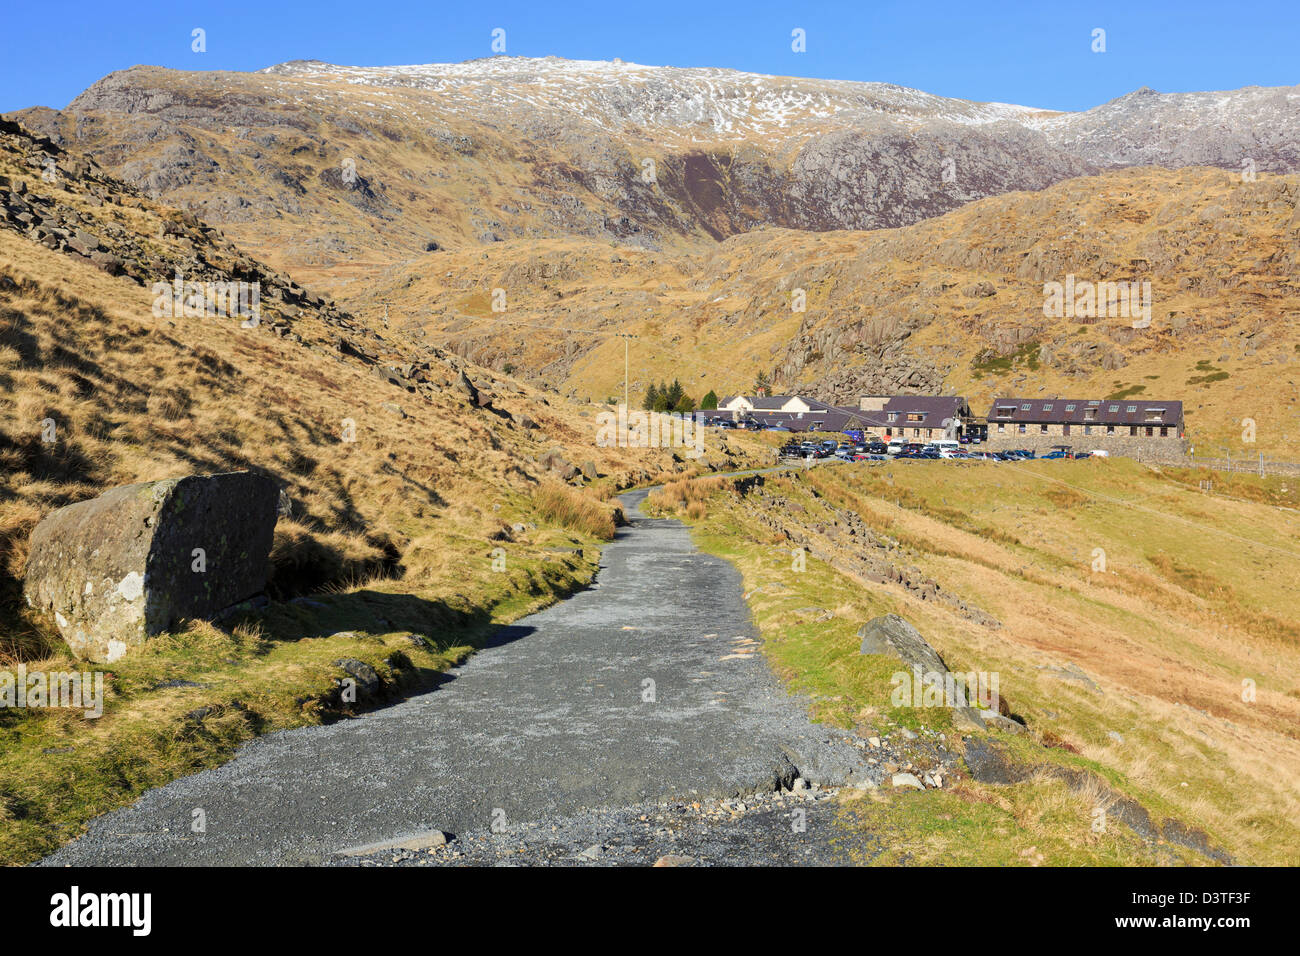 Pen-y-Pass from Miners track route to and from Mount Snowdon in mountains of Snowdonia National Park, Gwynedd, North Wales, UK Stock Photo